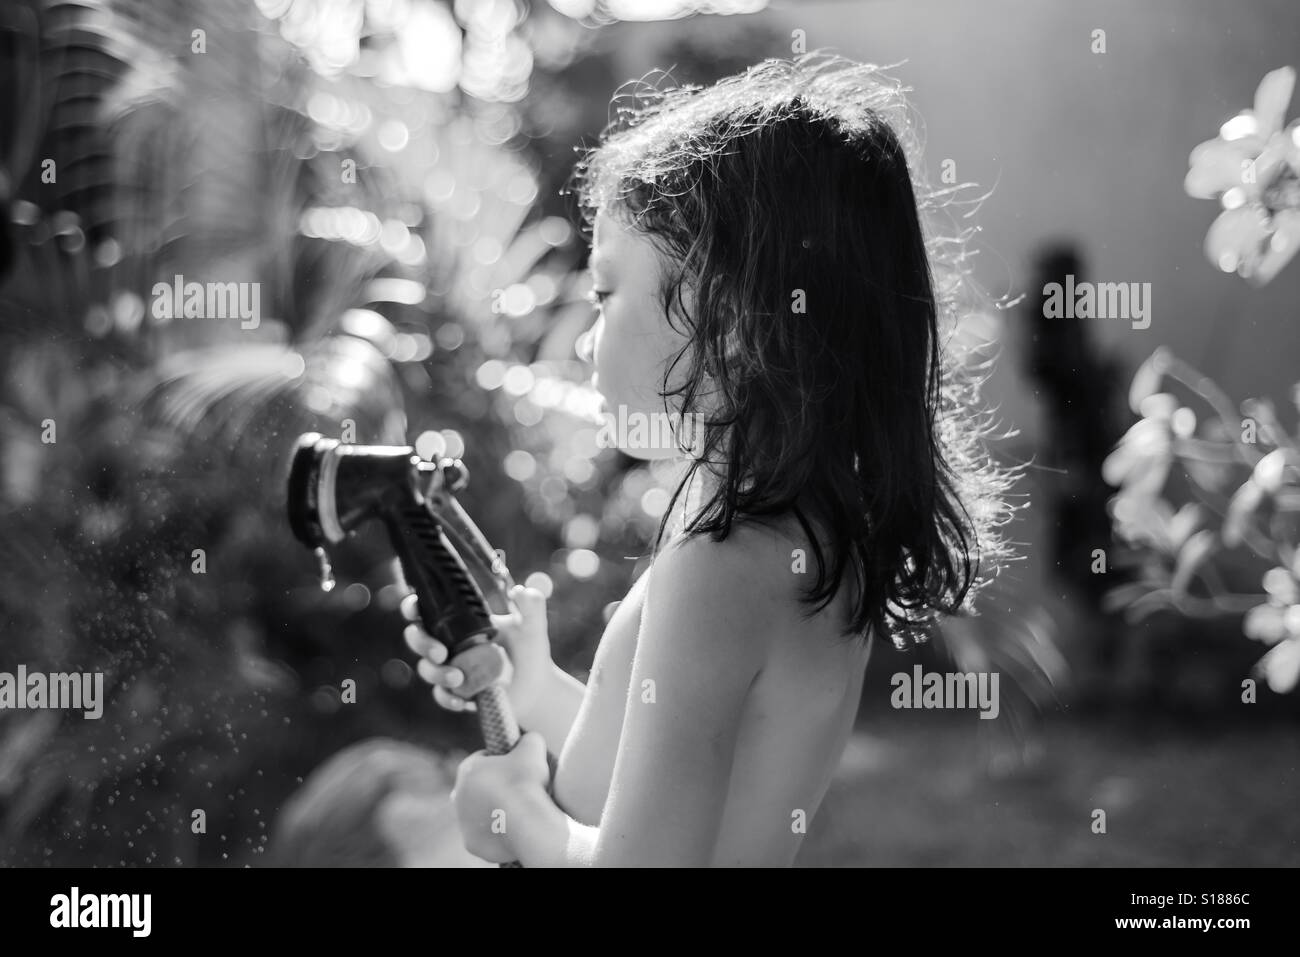 Young girl plays with water spray in black and white Stock Photo